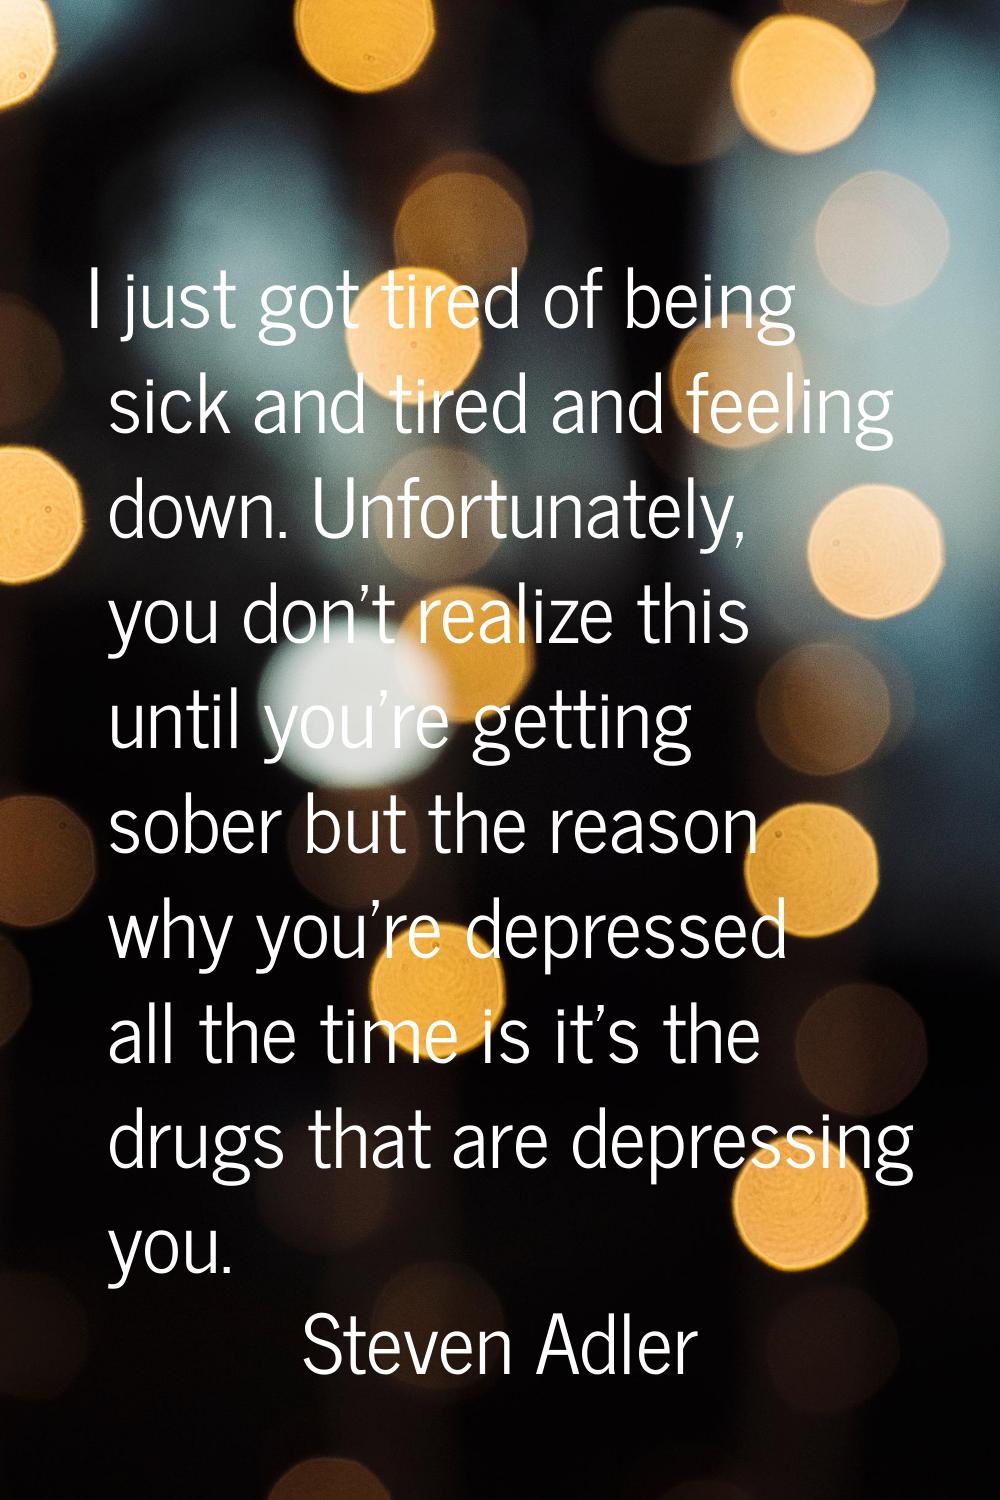 I just got tired of being sick and tired and feeling down. Unfortunately, you don't realize this un